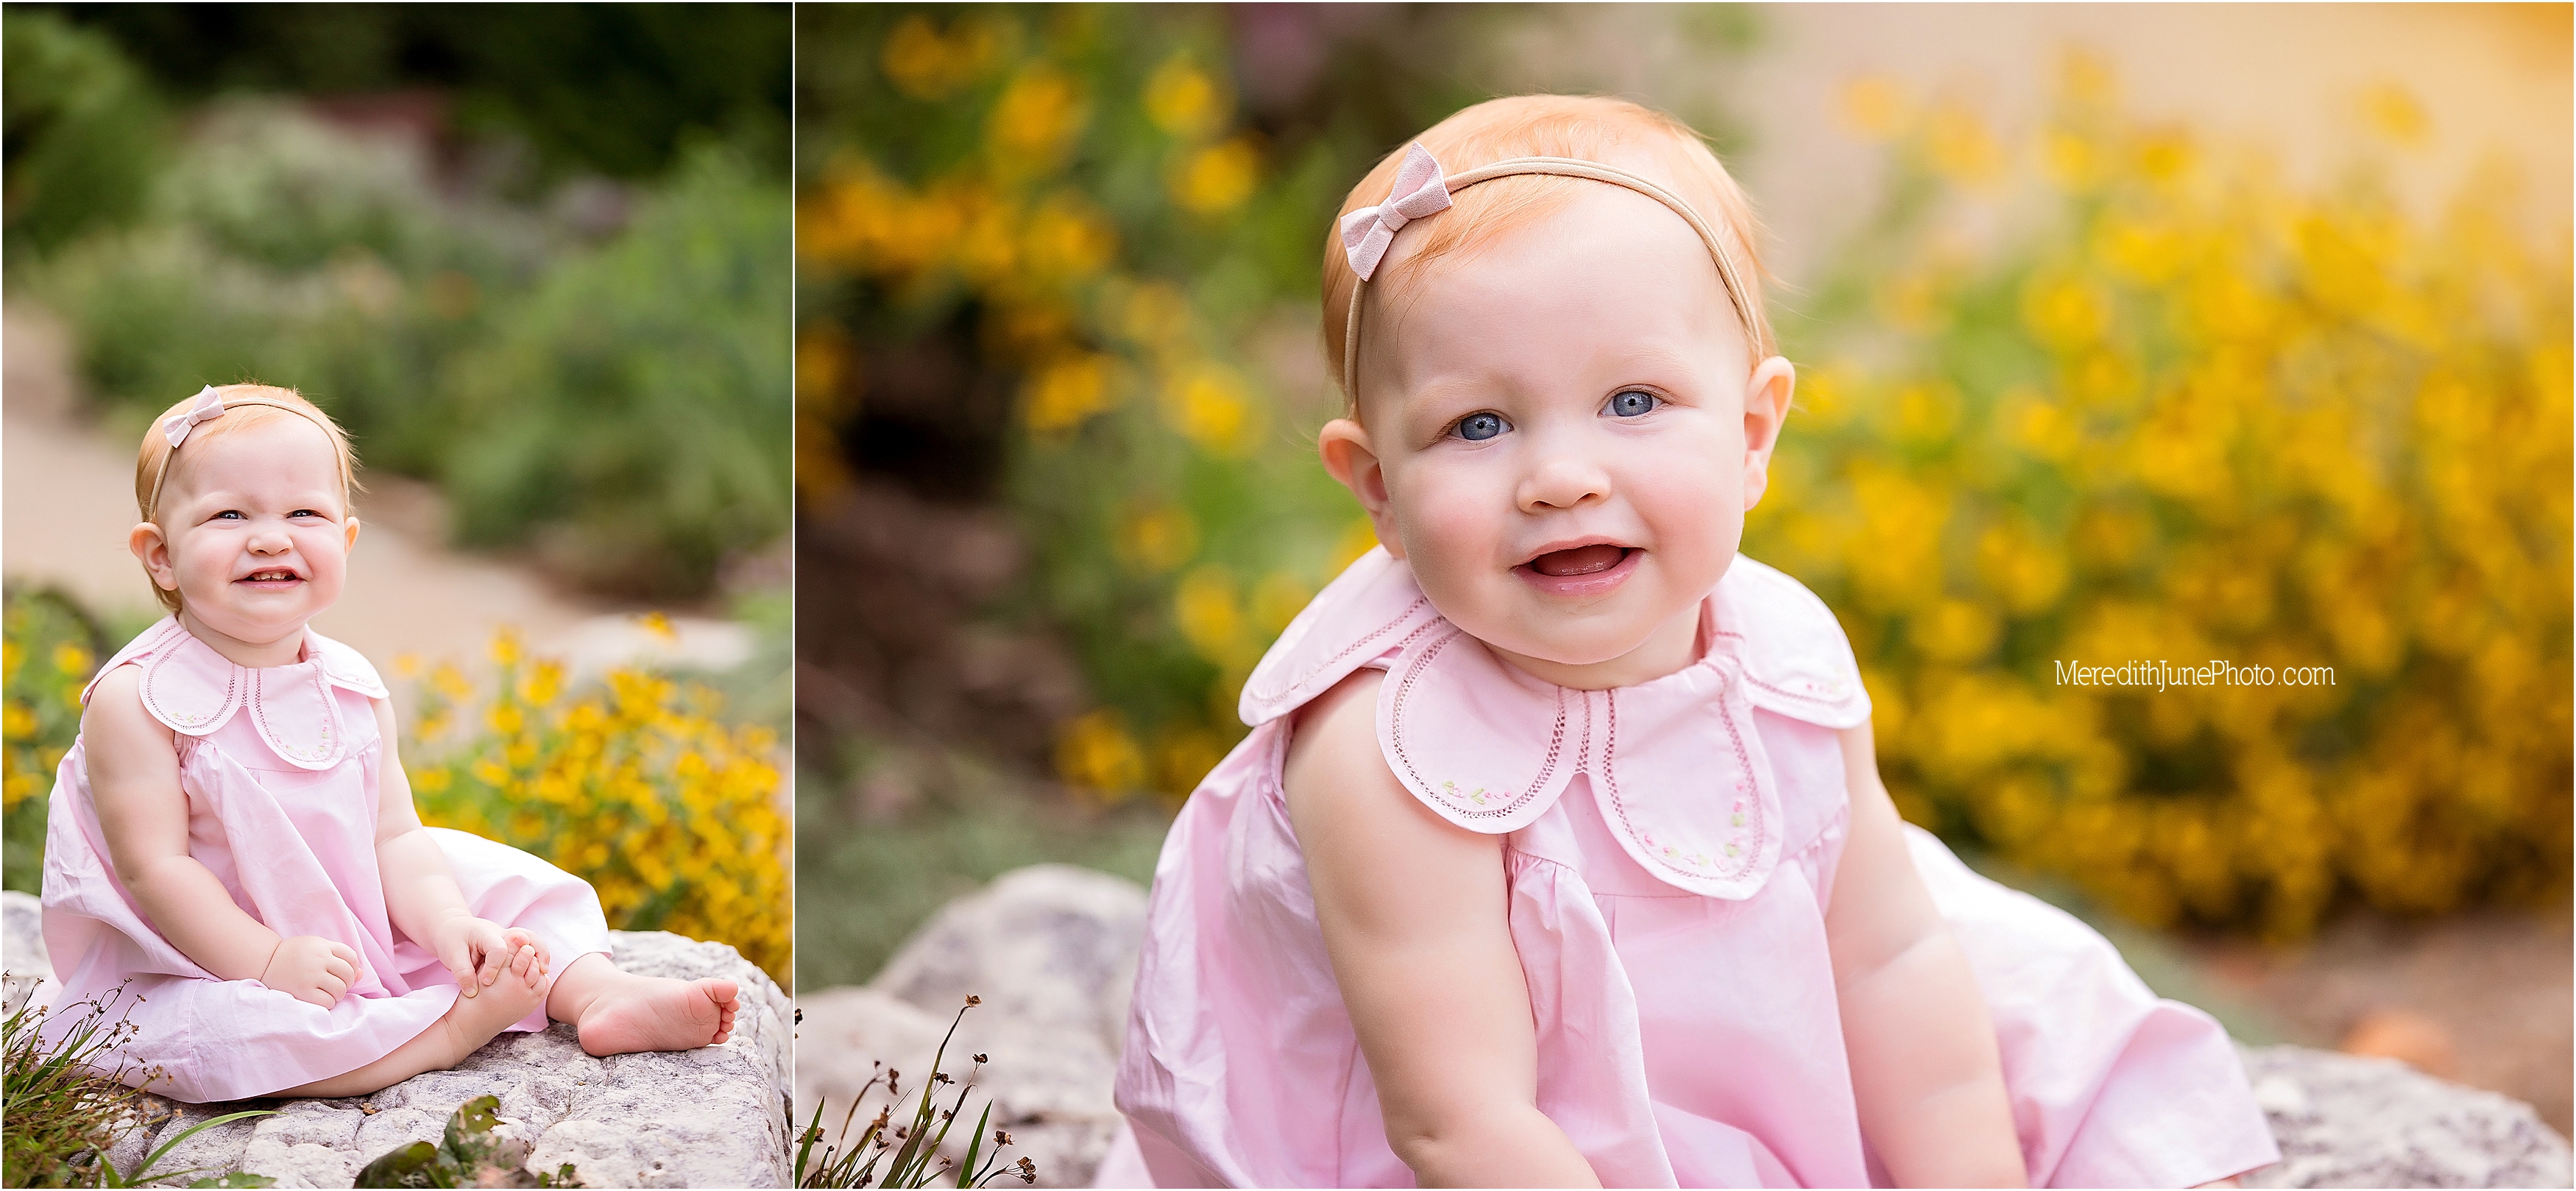 Adorable summertime one year session